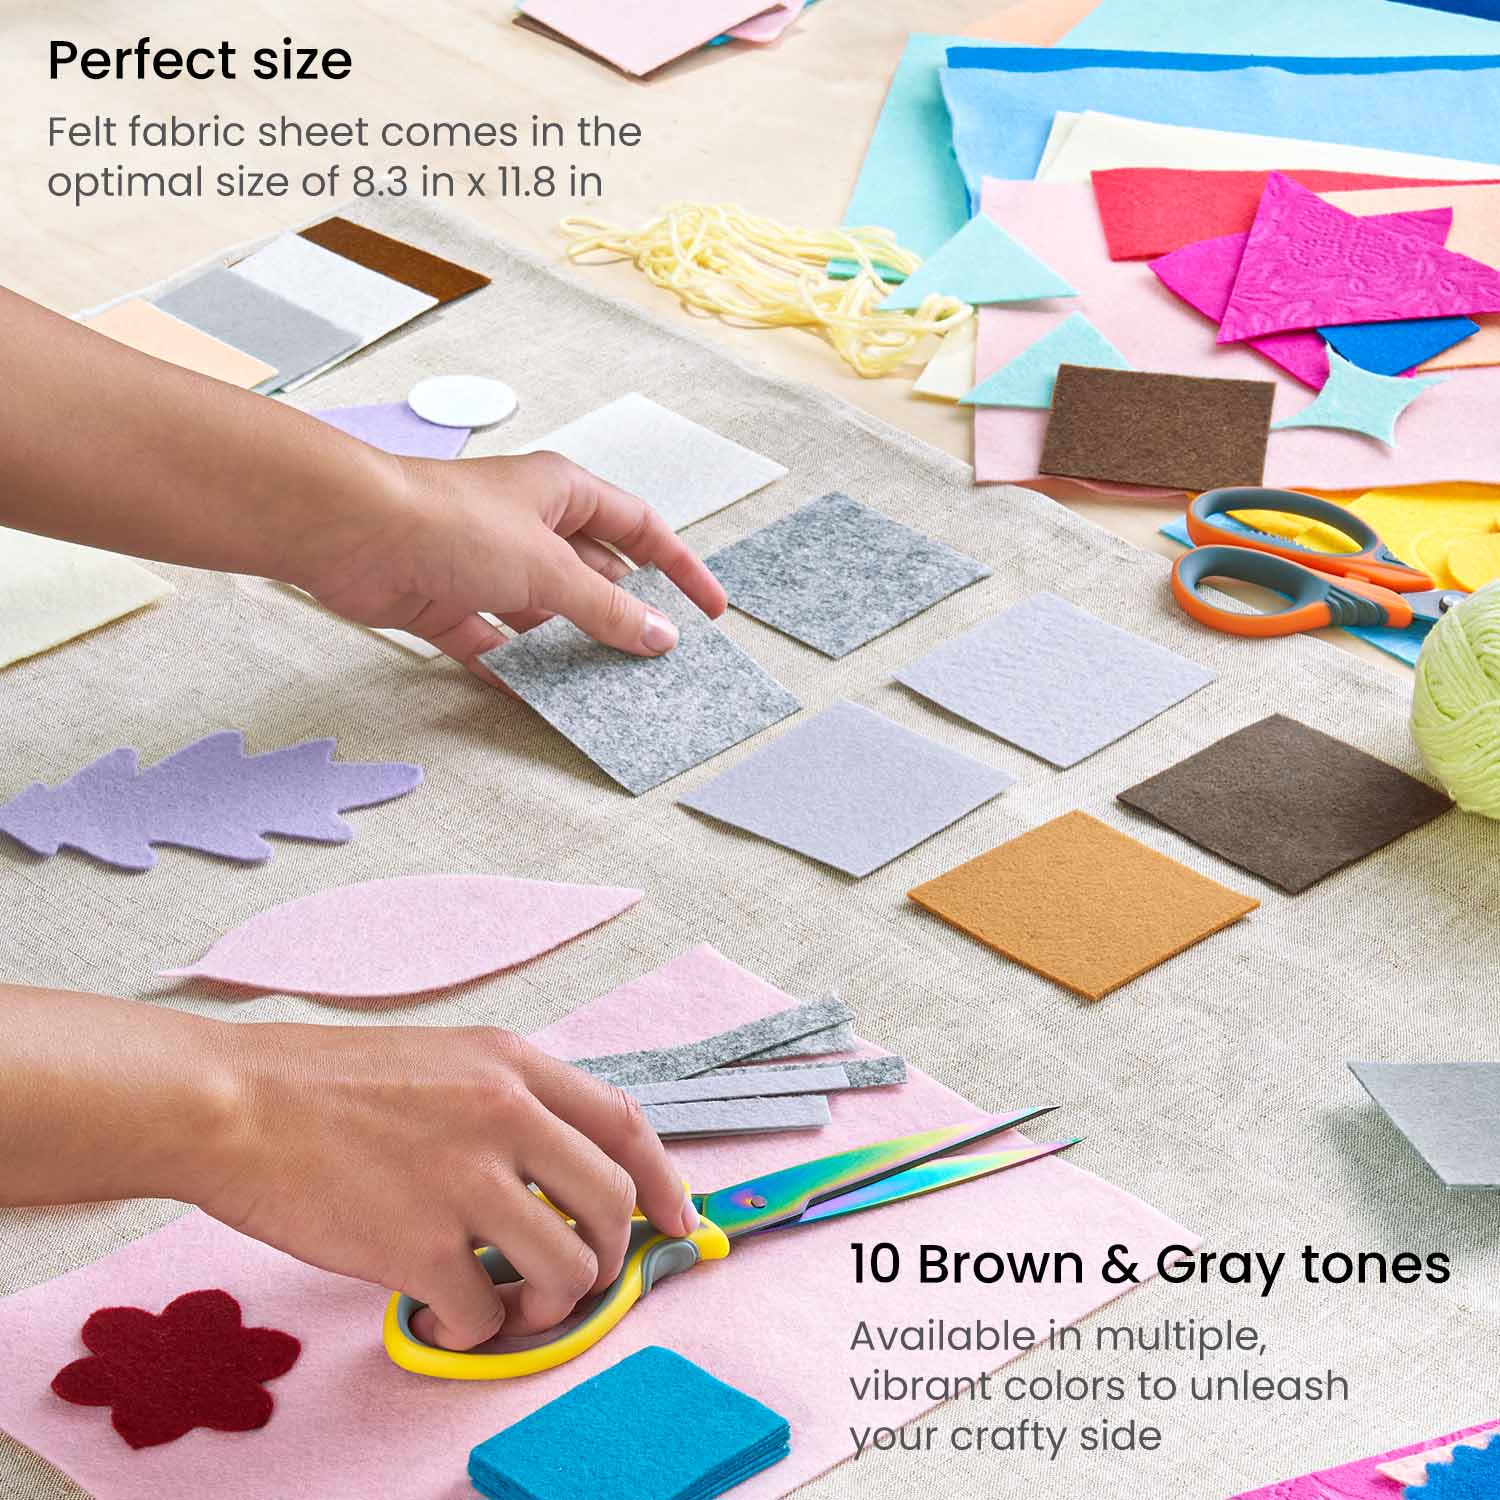 Vibrant Assorted Felt Fabric Sheets for Creative Crafts